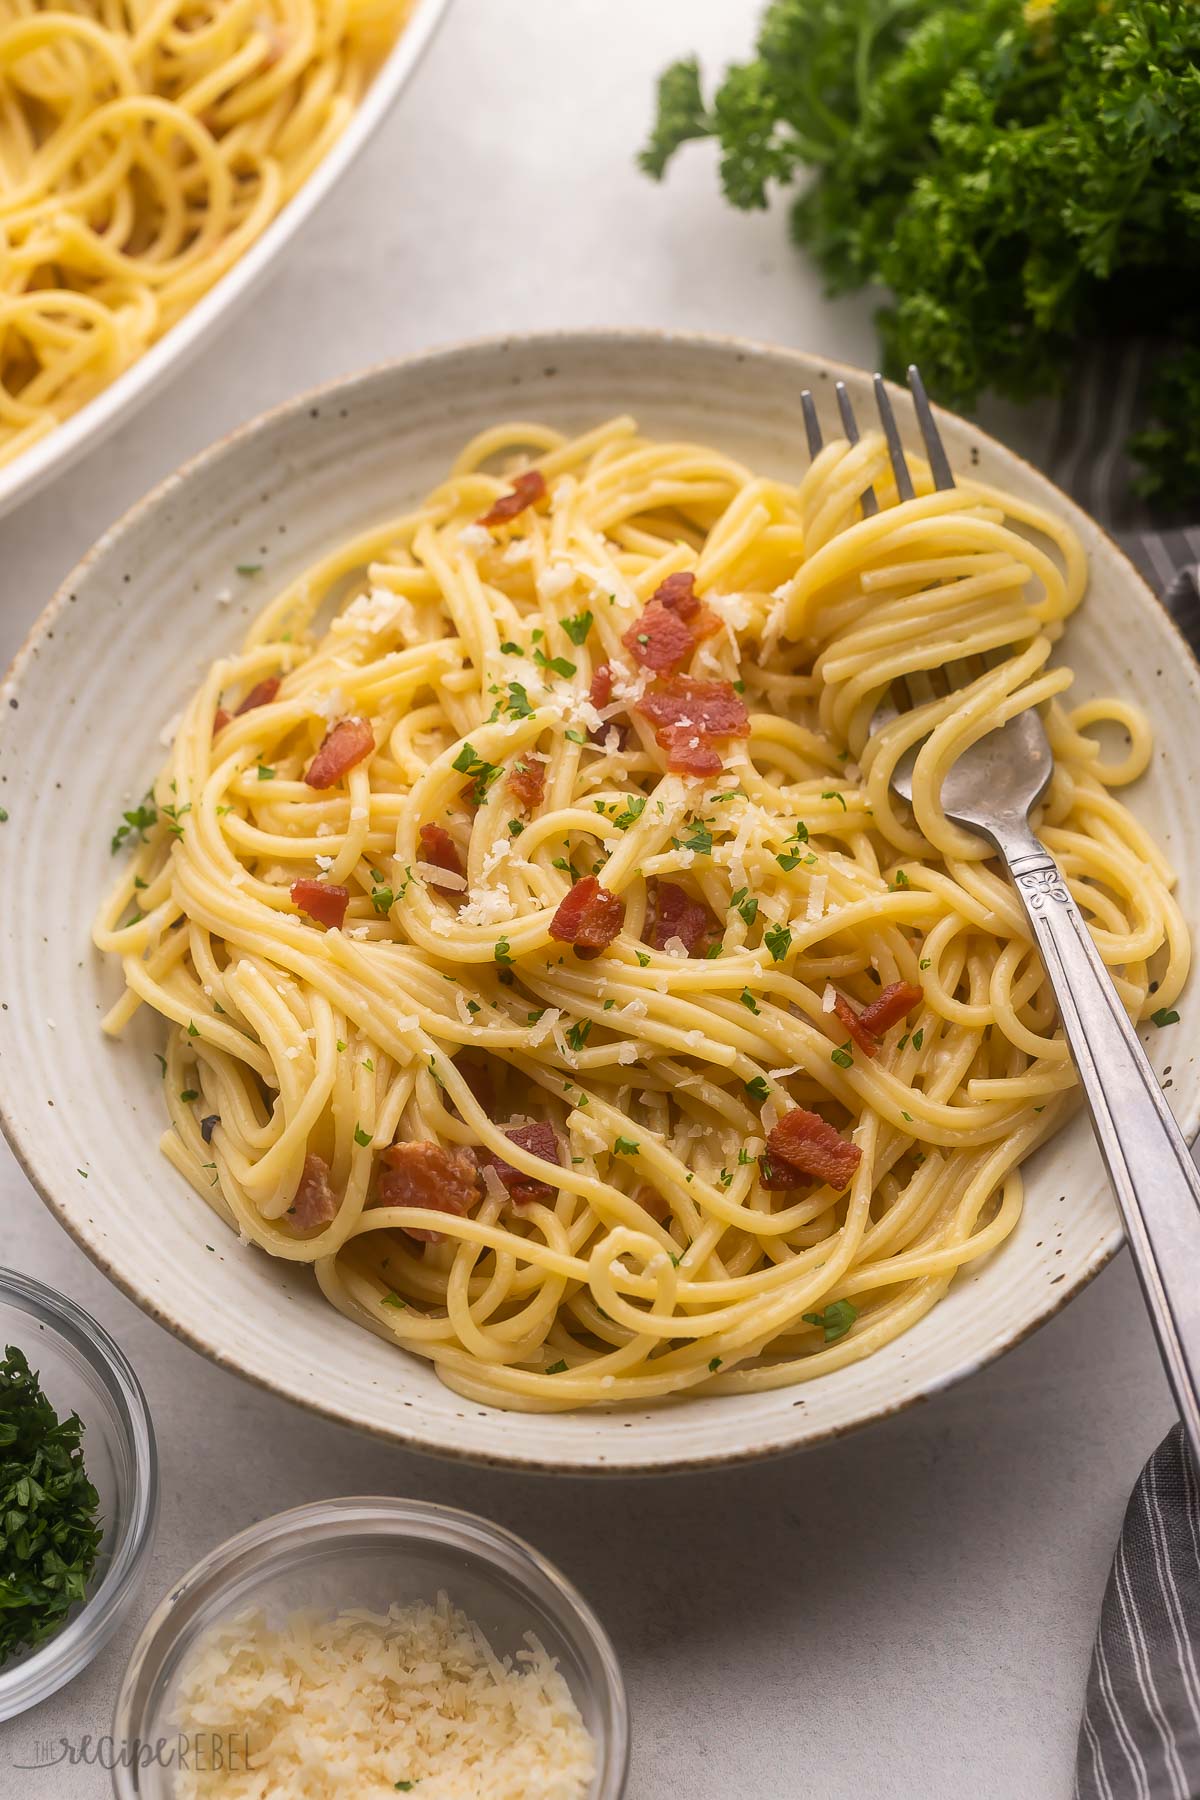 large plate full of spaghetti carbonara with parsley and parmesan beside.